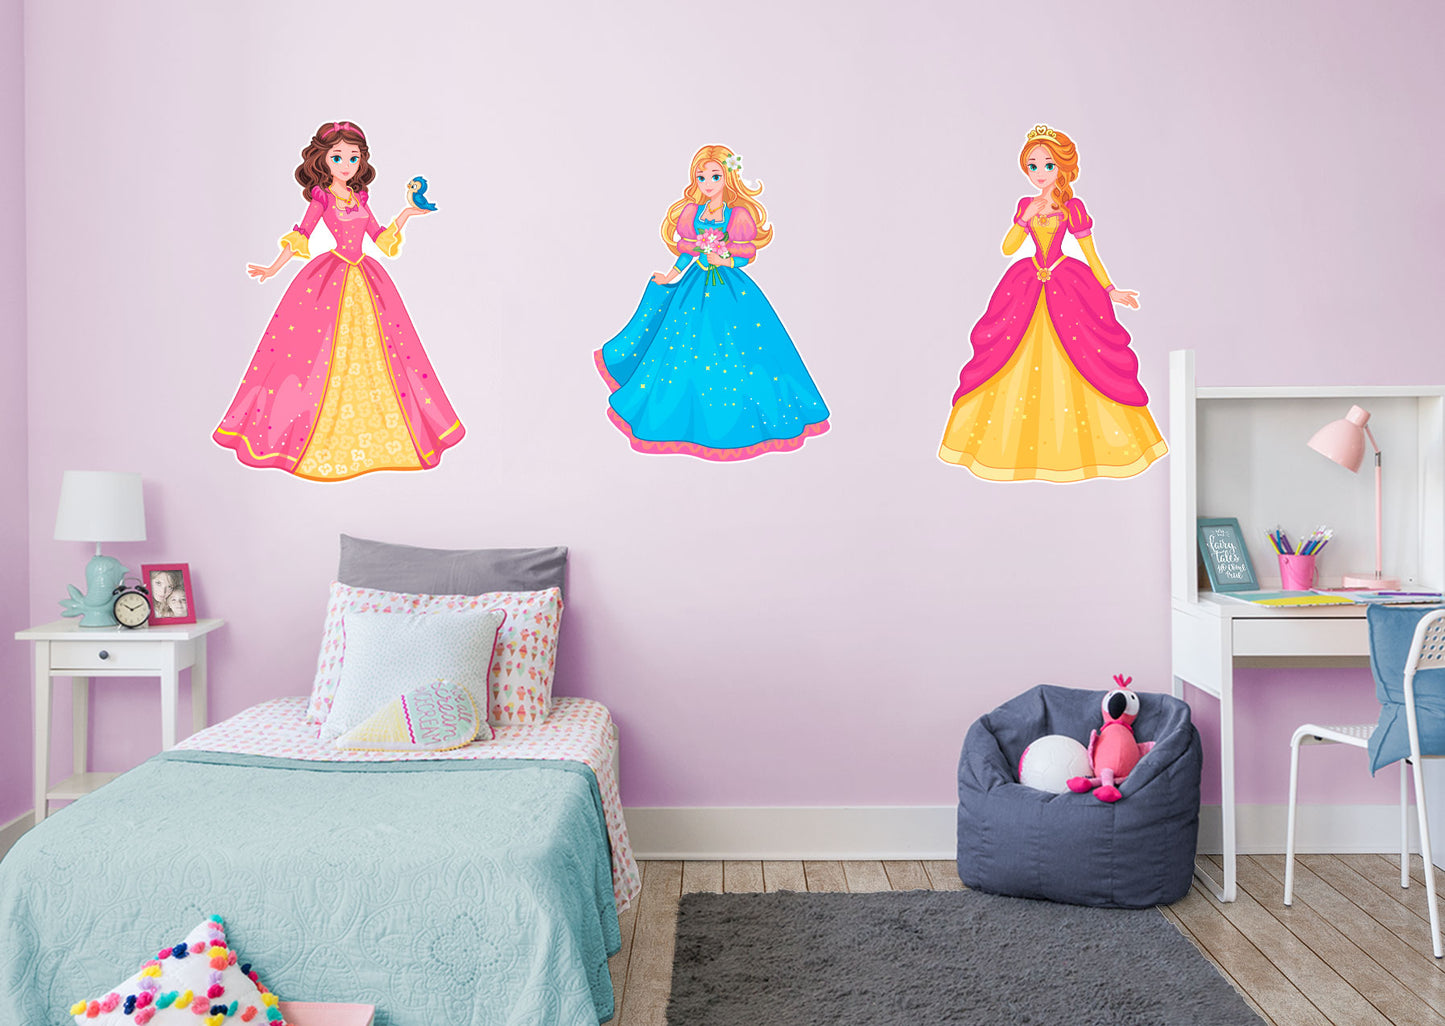 Nursery:  Three Sisters Collection        -   Removable Wall   Adhesive Decal